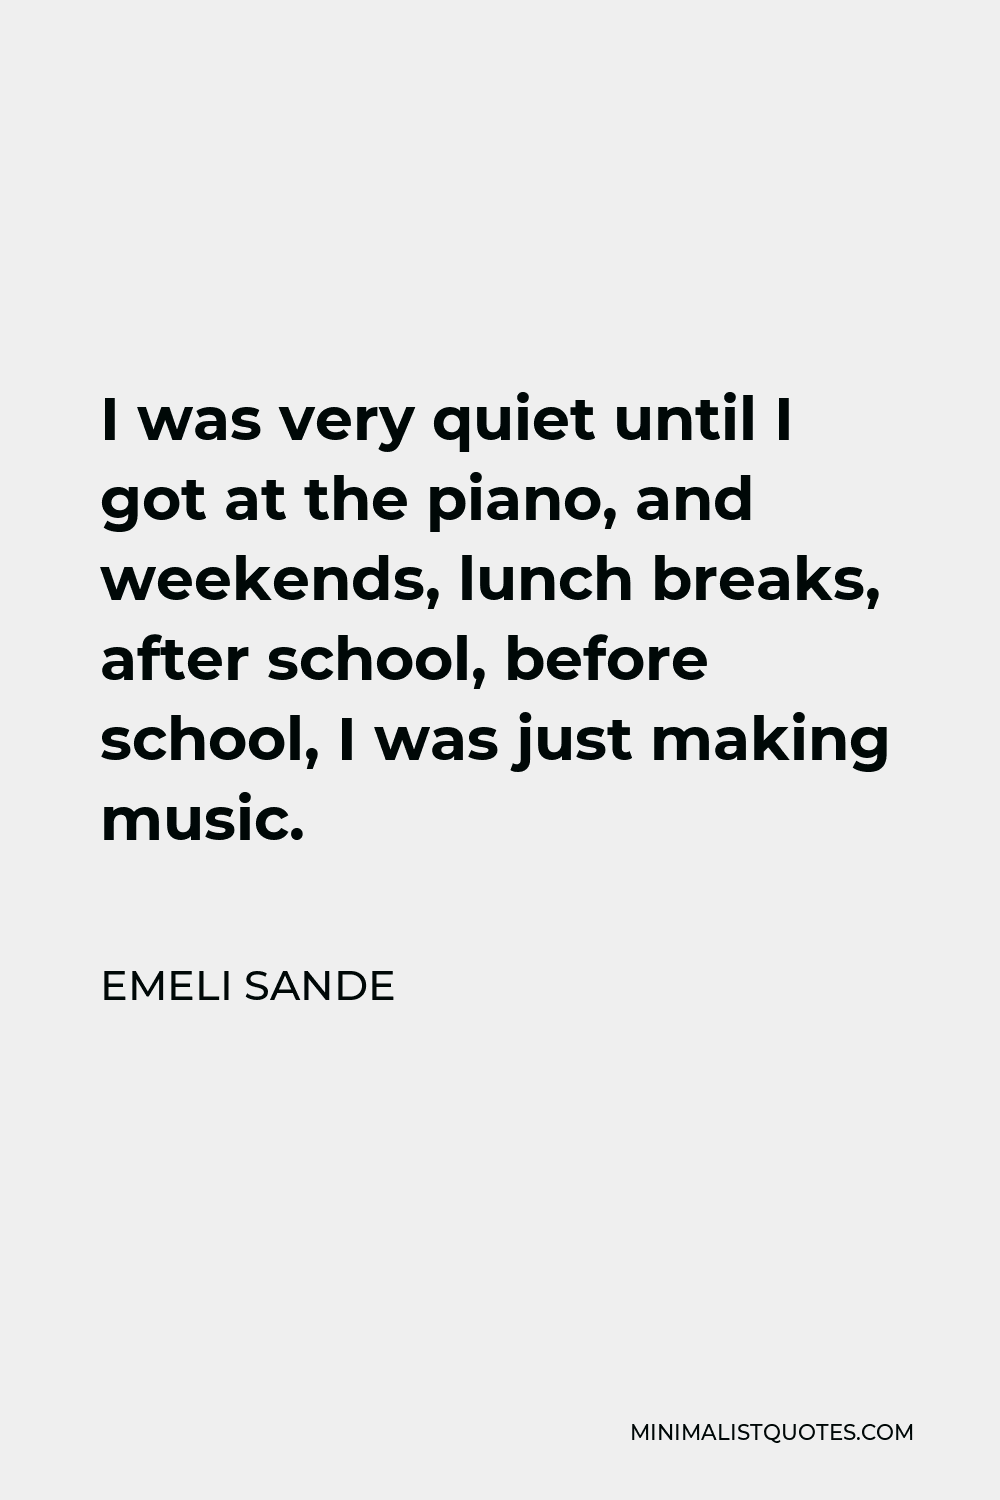 Emeli Sande Quote - I was very quiet until I got at the piano, and weekends, lunch breaks, after school, before school, I was just making music.